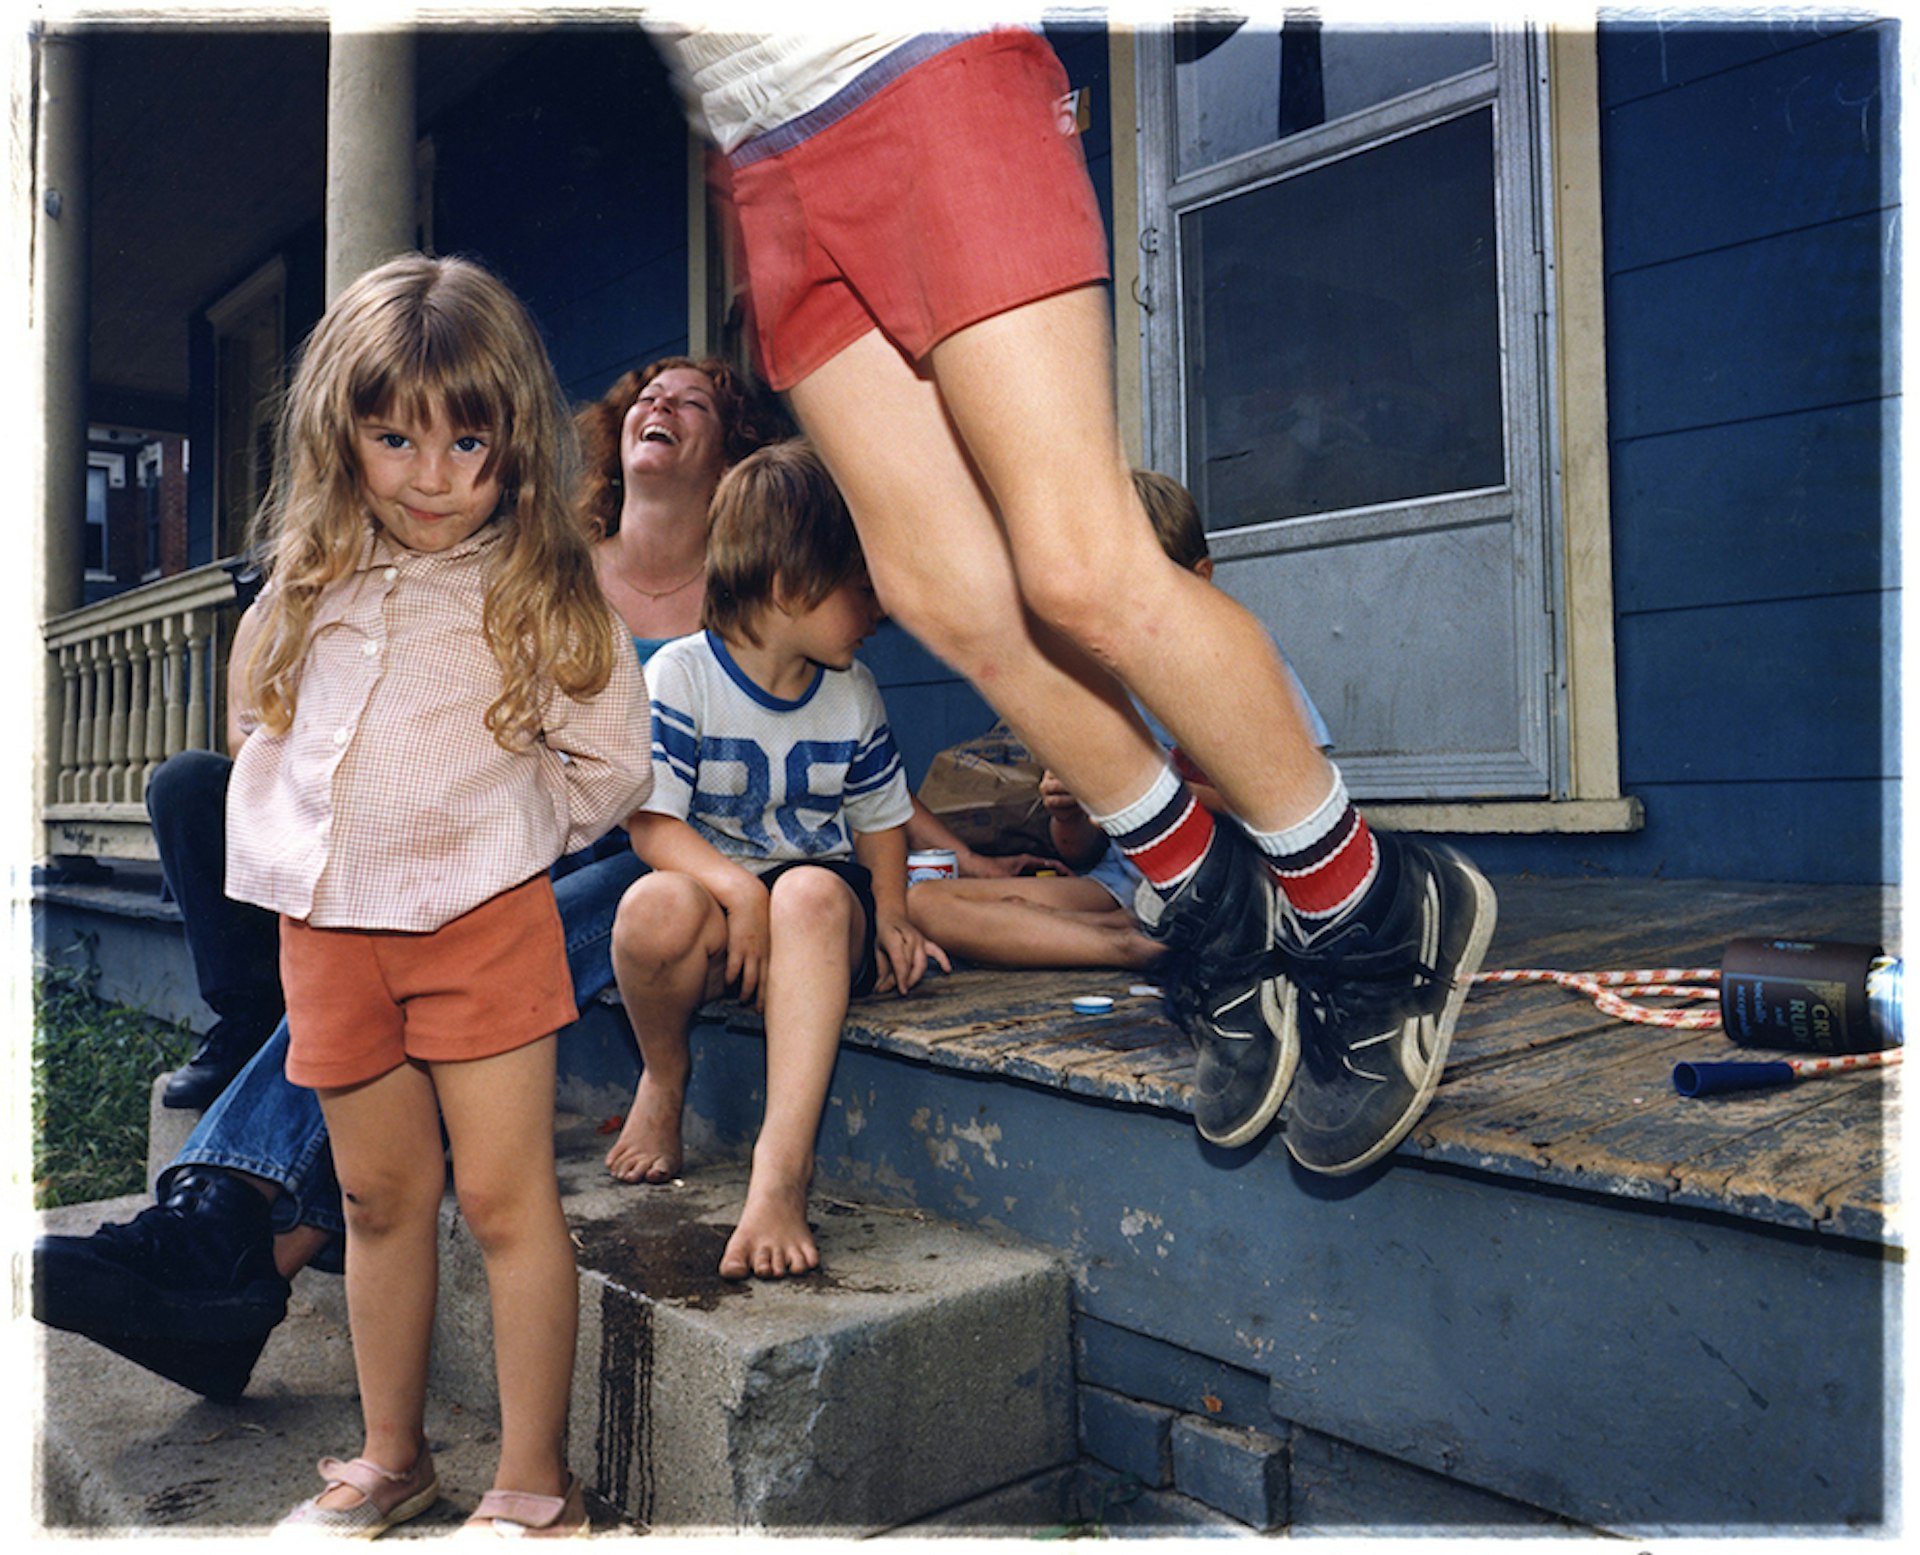 An unflinching portrait of America’s Rust Belt in the ‘80s